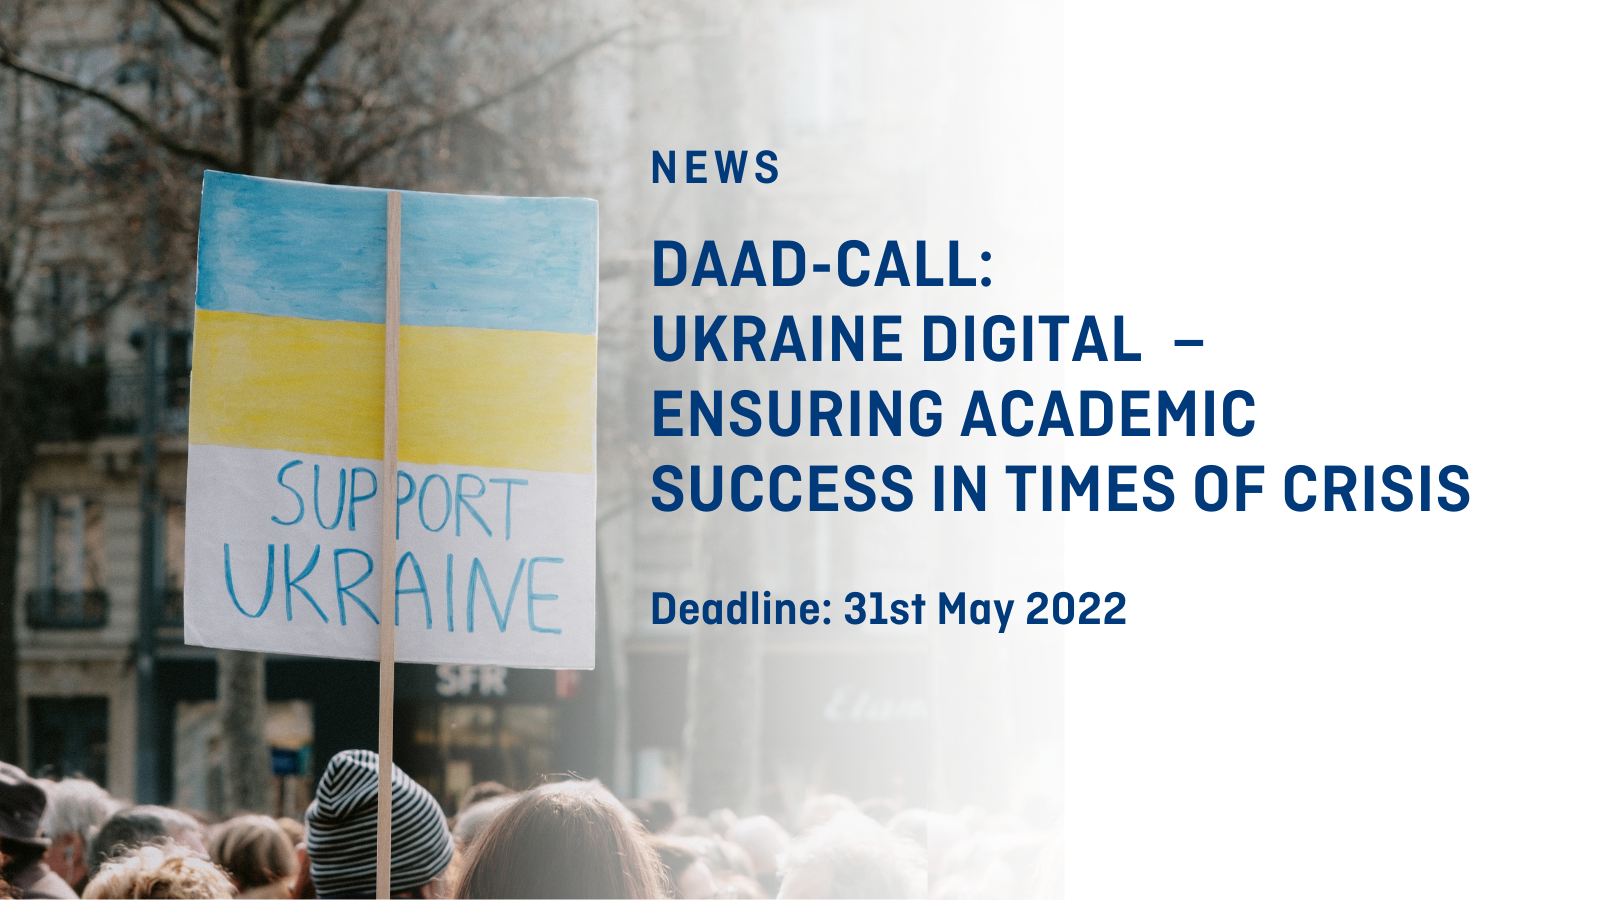 Cover photo for the news item: DAAD Call for Proposals: Ukraine Digital - Securing Student Success in Times of Crisis.